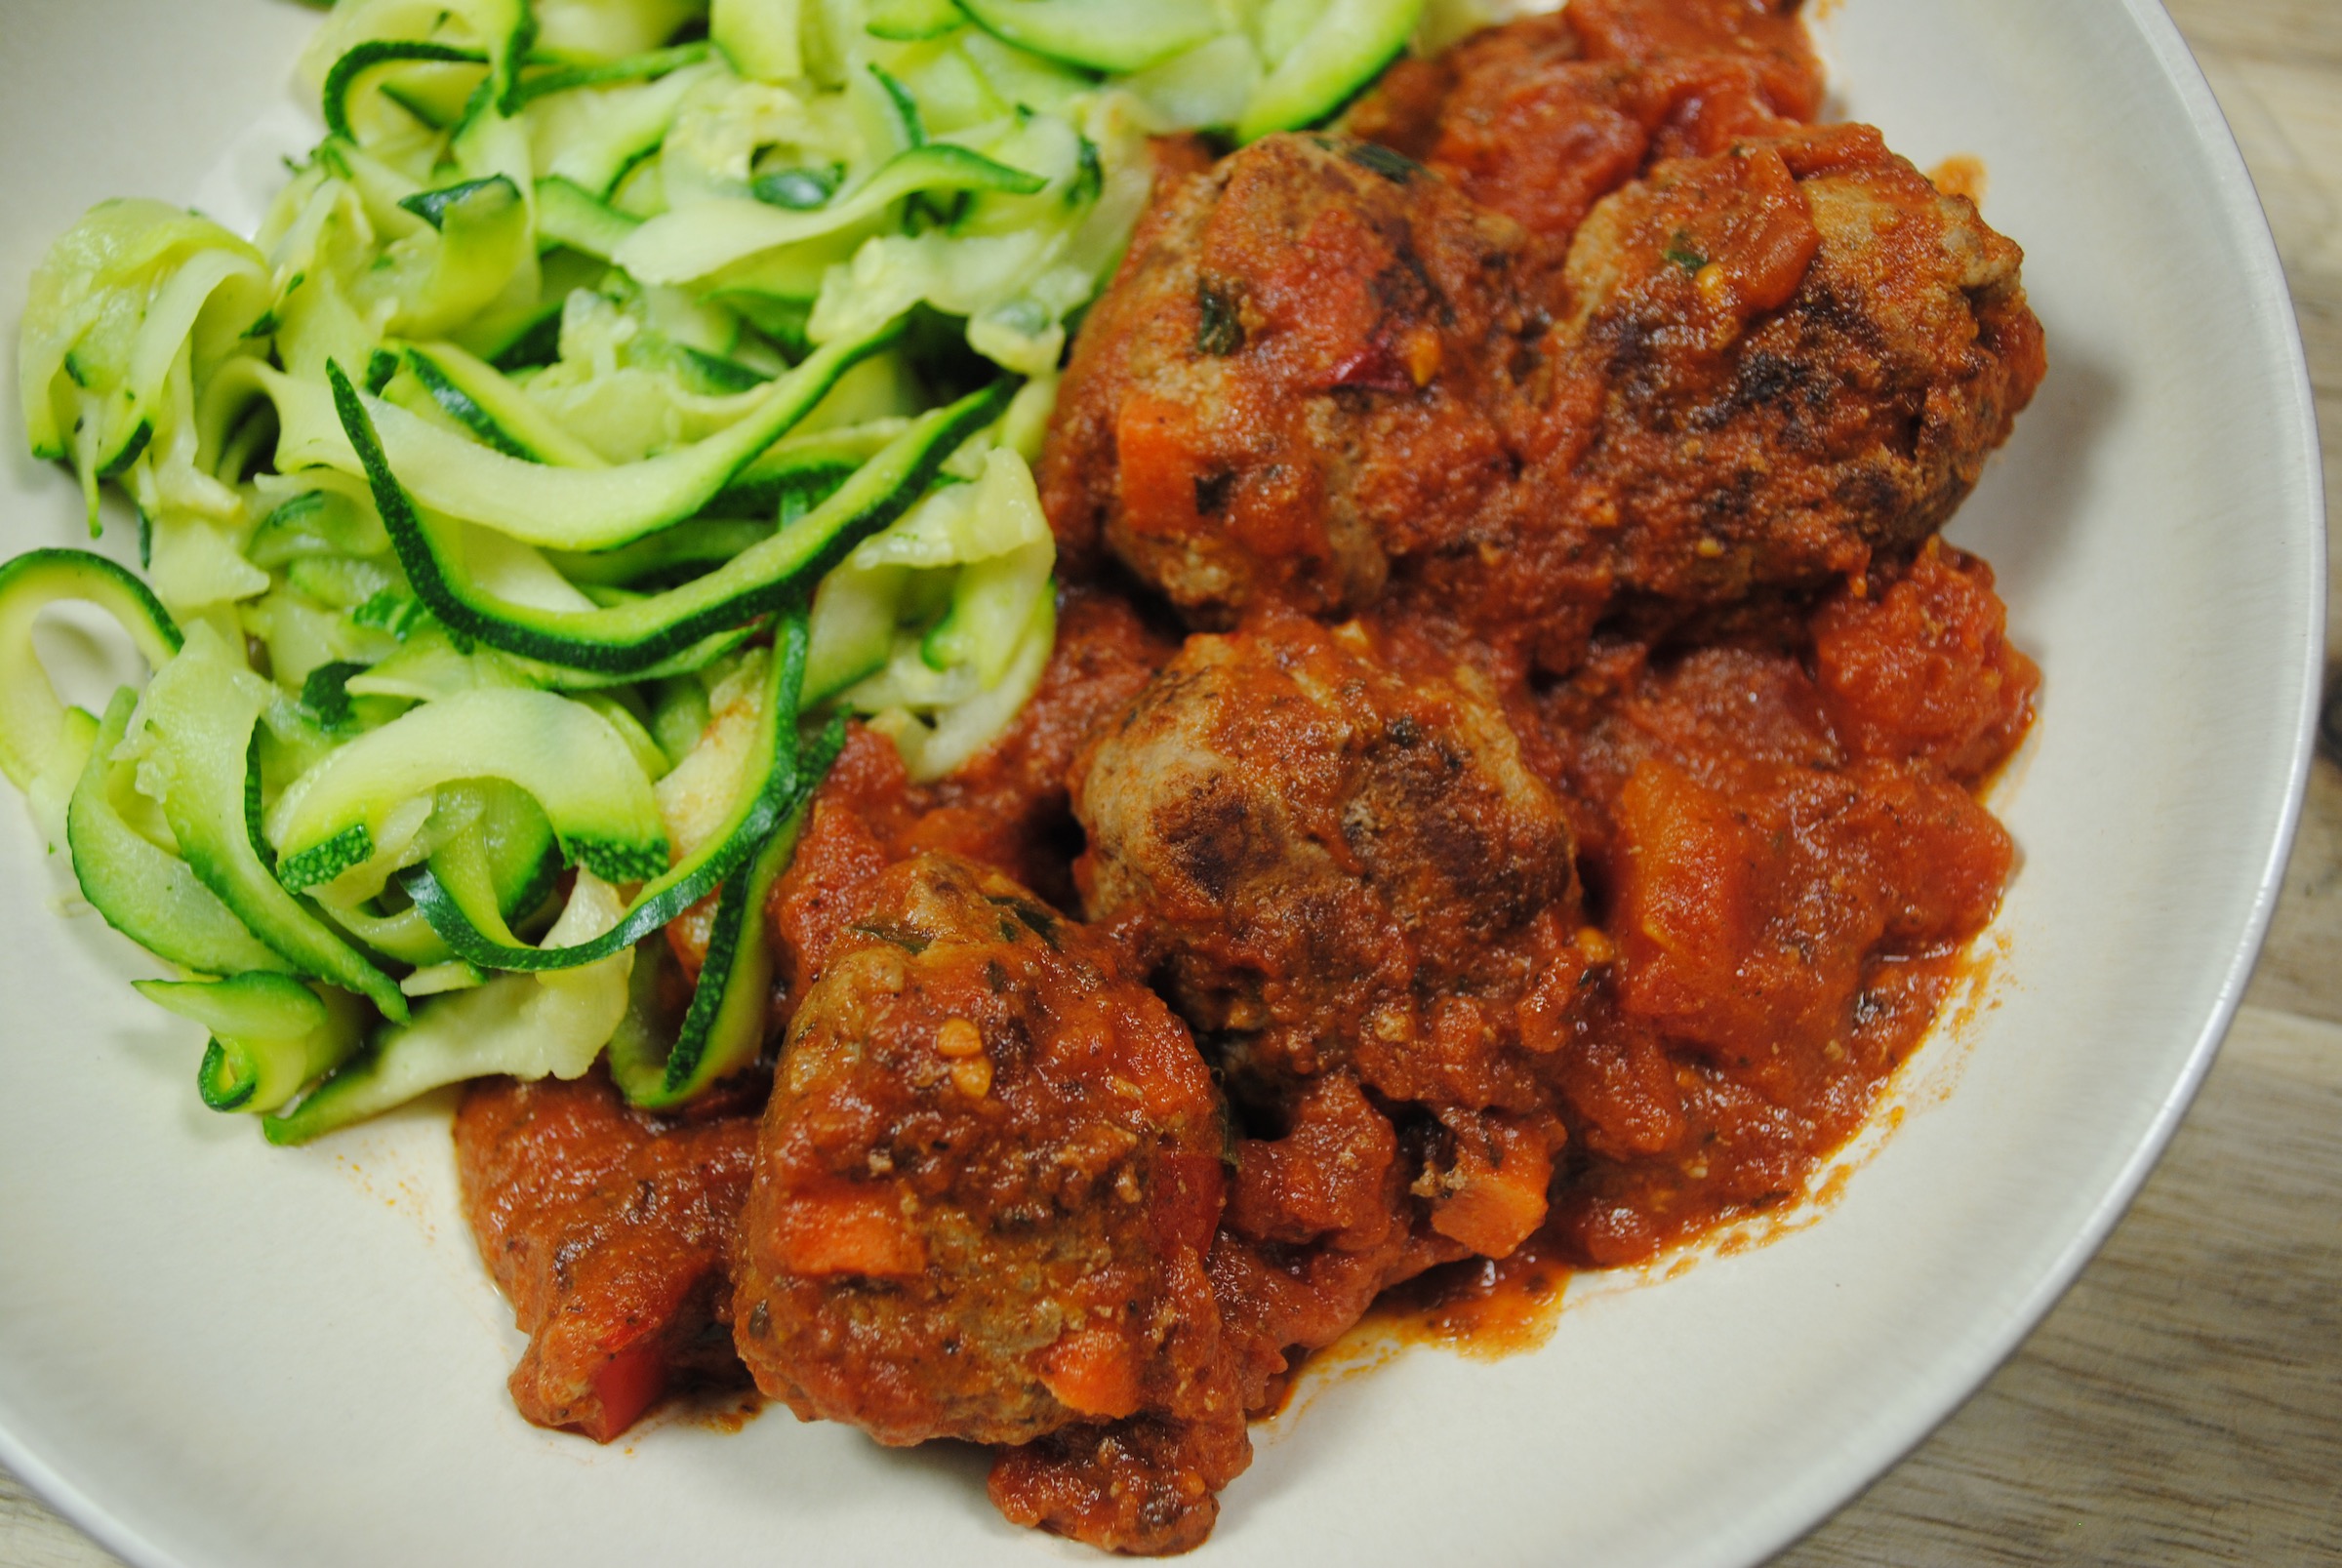 Saucy Homemade Meatballs and Courgetti Recipe - 1